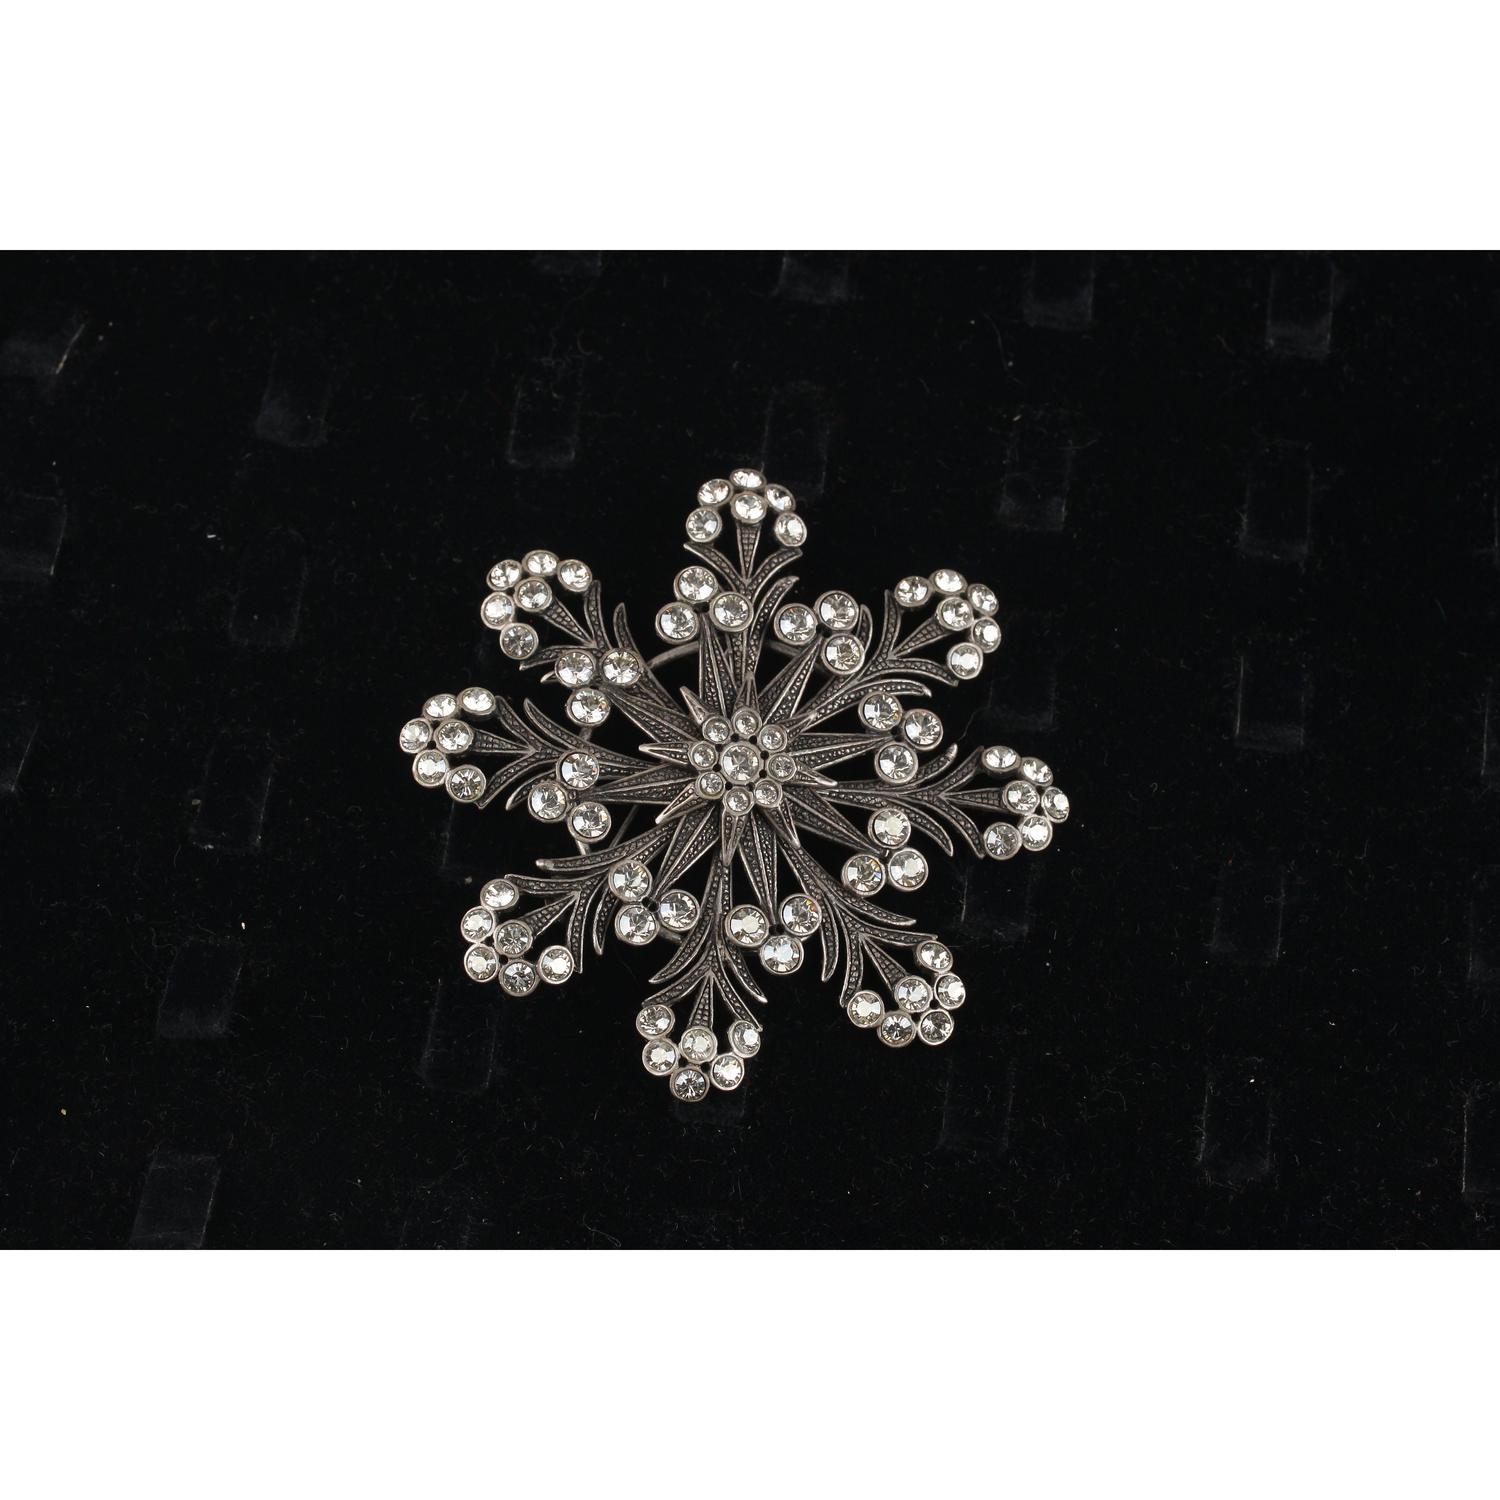 Haute Couture Snoflake Brooch created by Gianni De Liguoro in the 2000s. Antiquated silver metal decorated with white crystal rhinestones. Safety pin closure on the back. De Liguoro signature engraved on the back. Max, Width: 3.5 inches - 8,8 cm